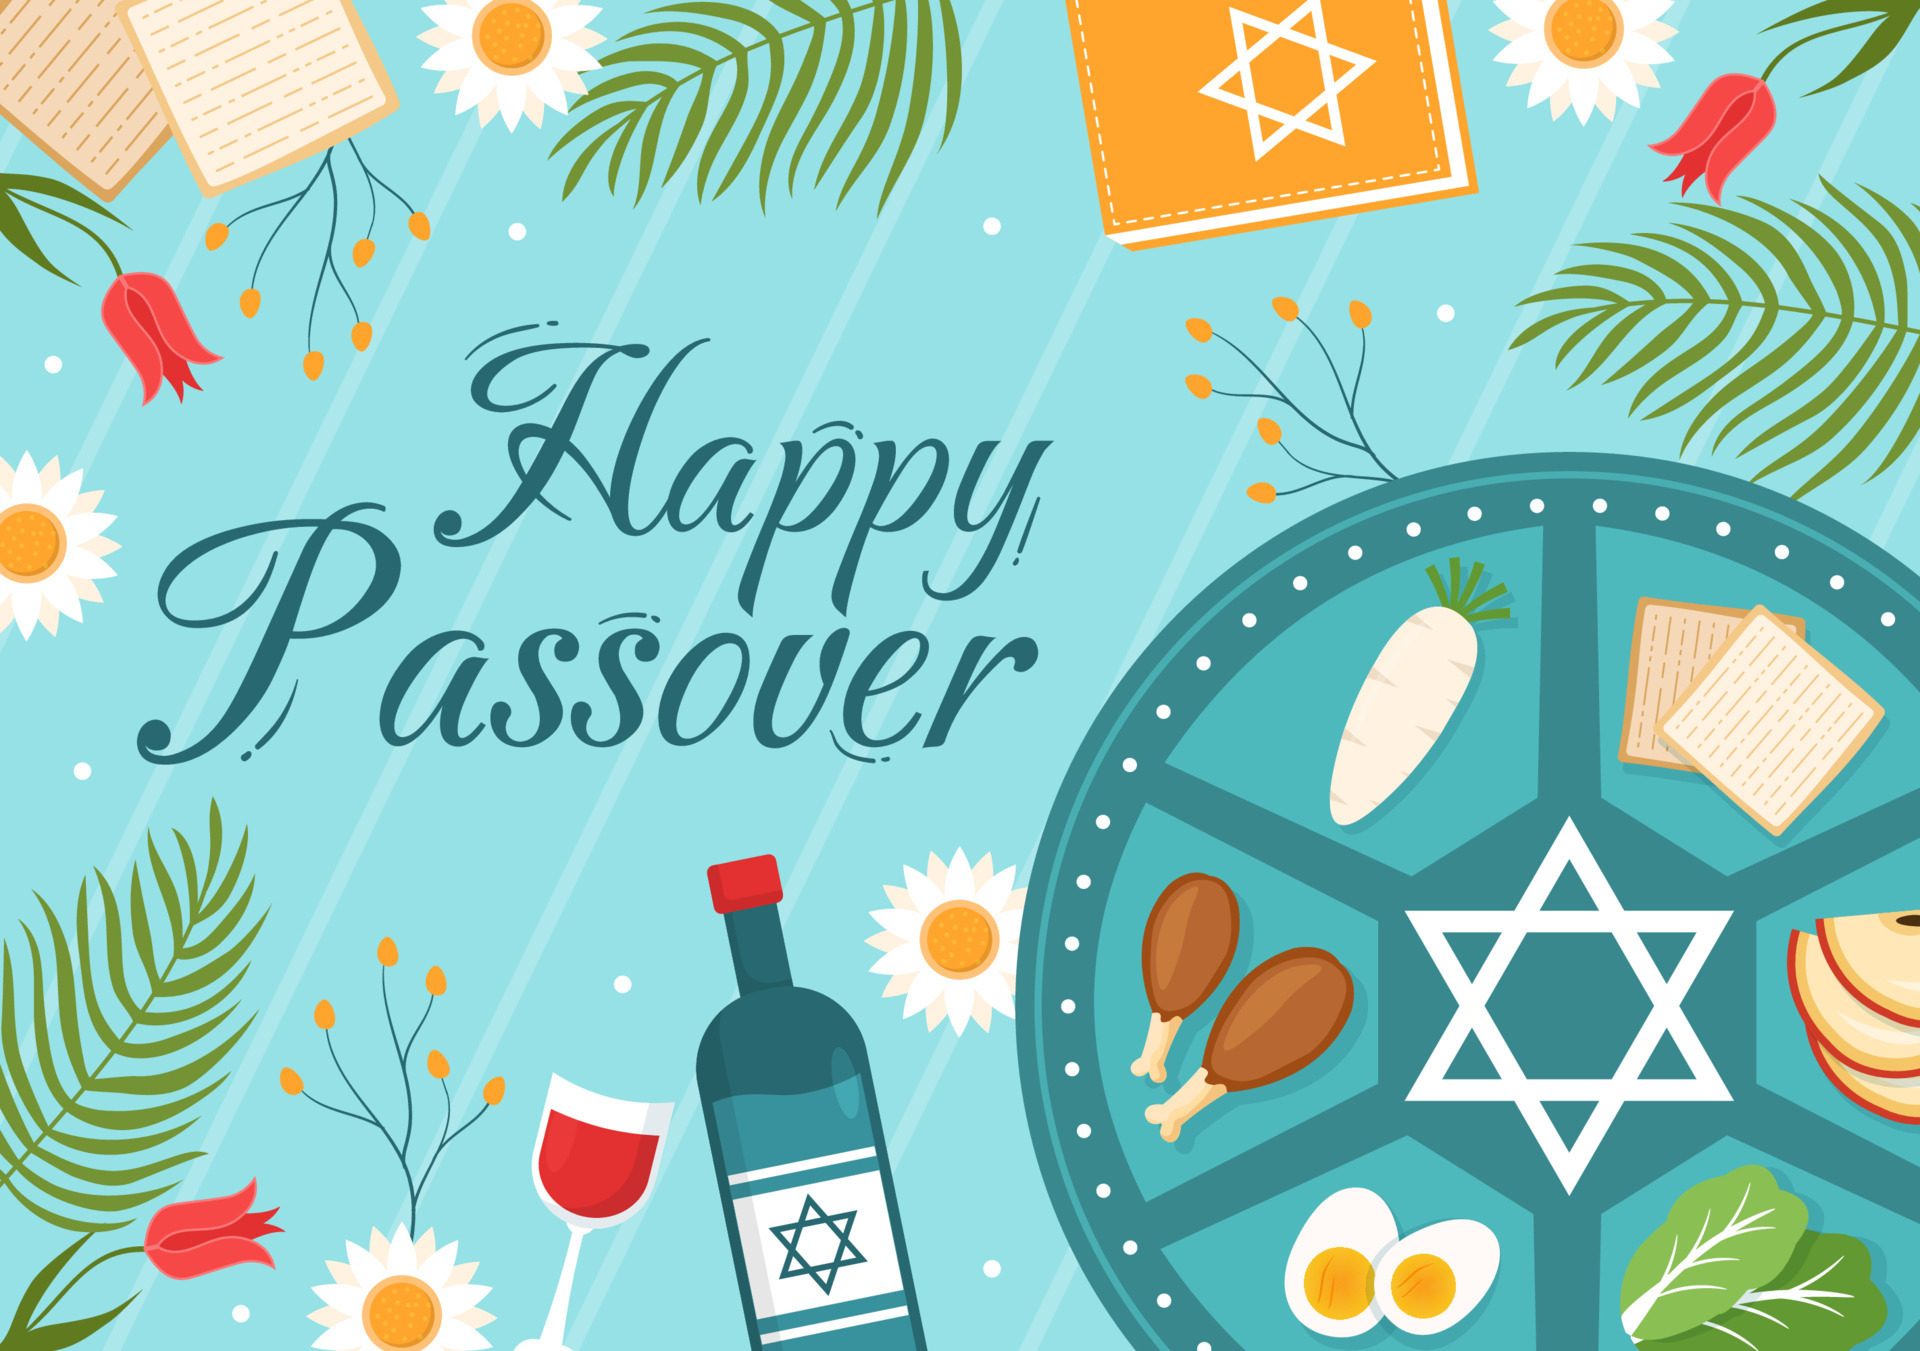 Happy Passover Illustration with Wine, Matzah and Pesach Jewish Holiday